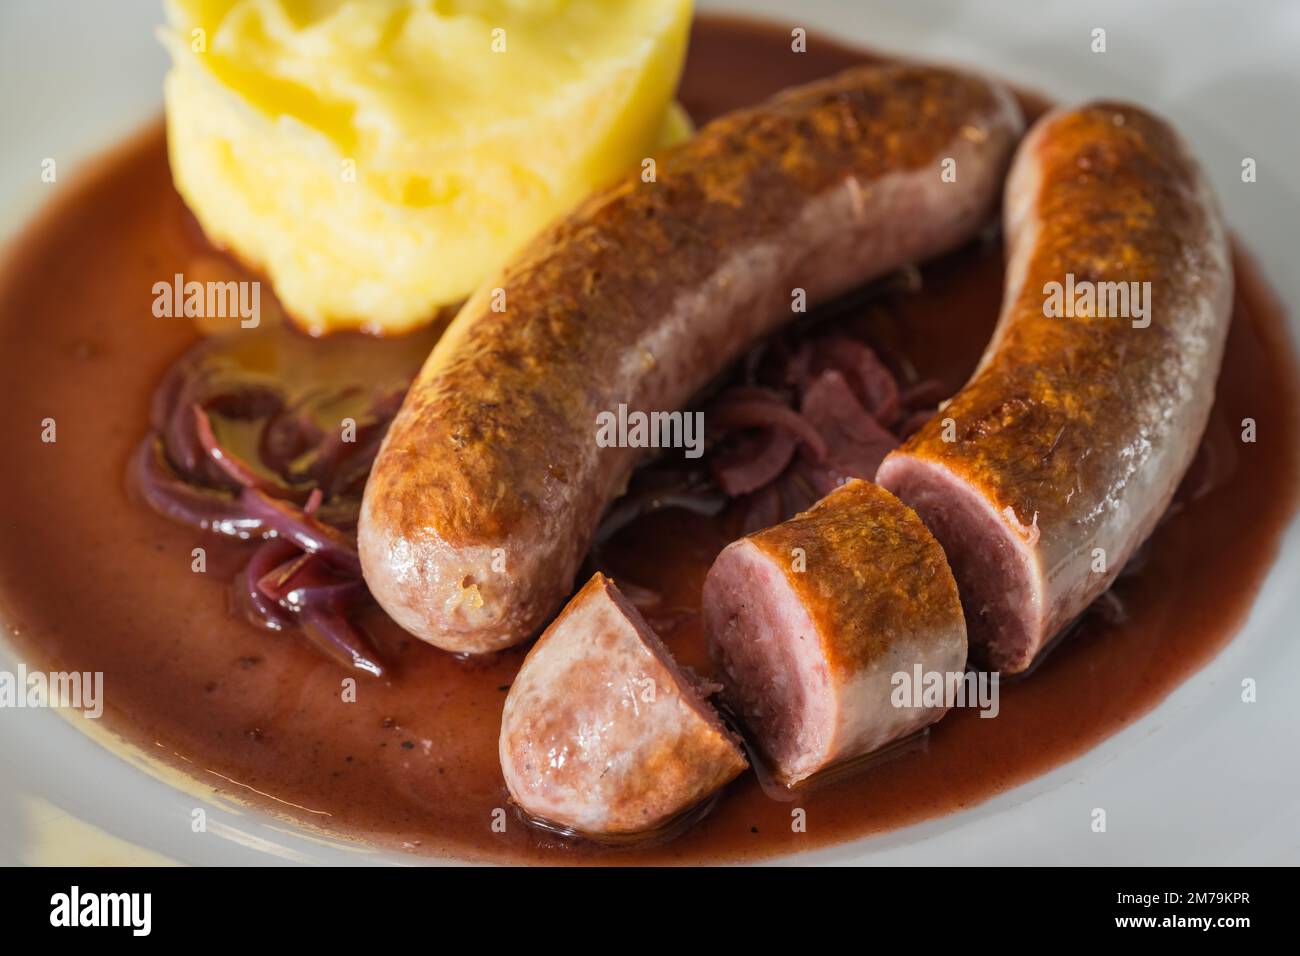 Venison Sausage or Bangers with Mash and Red Wine and Onion Gravy Stock Photo